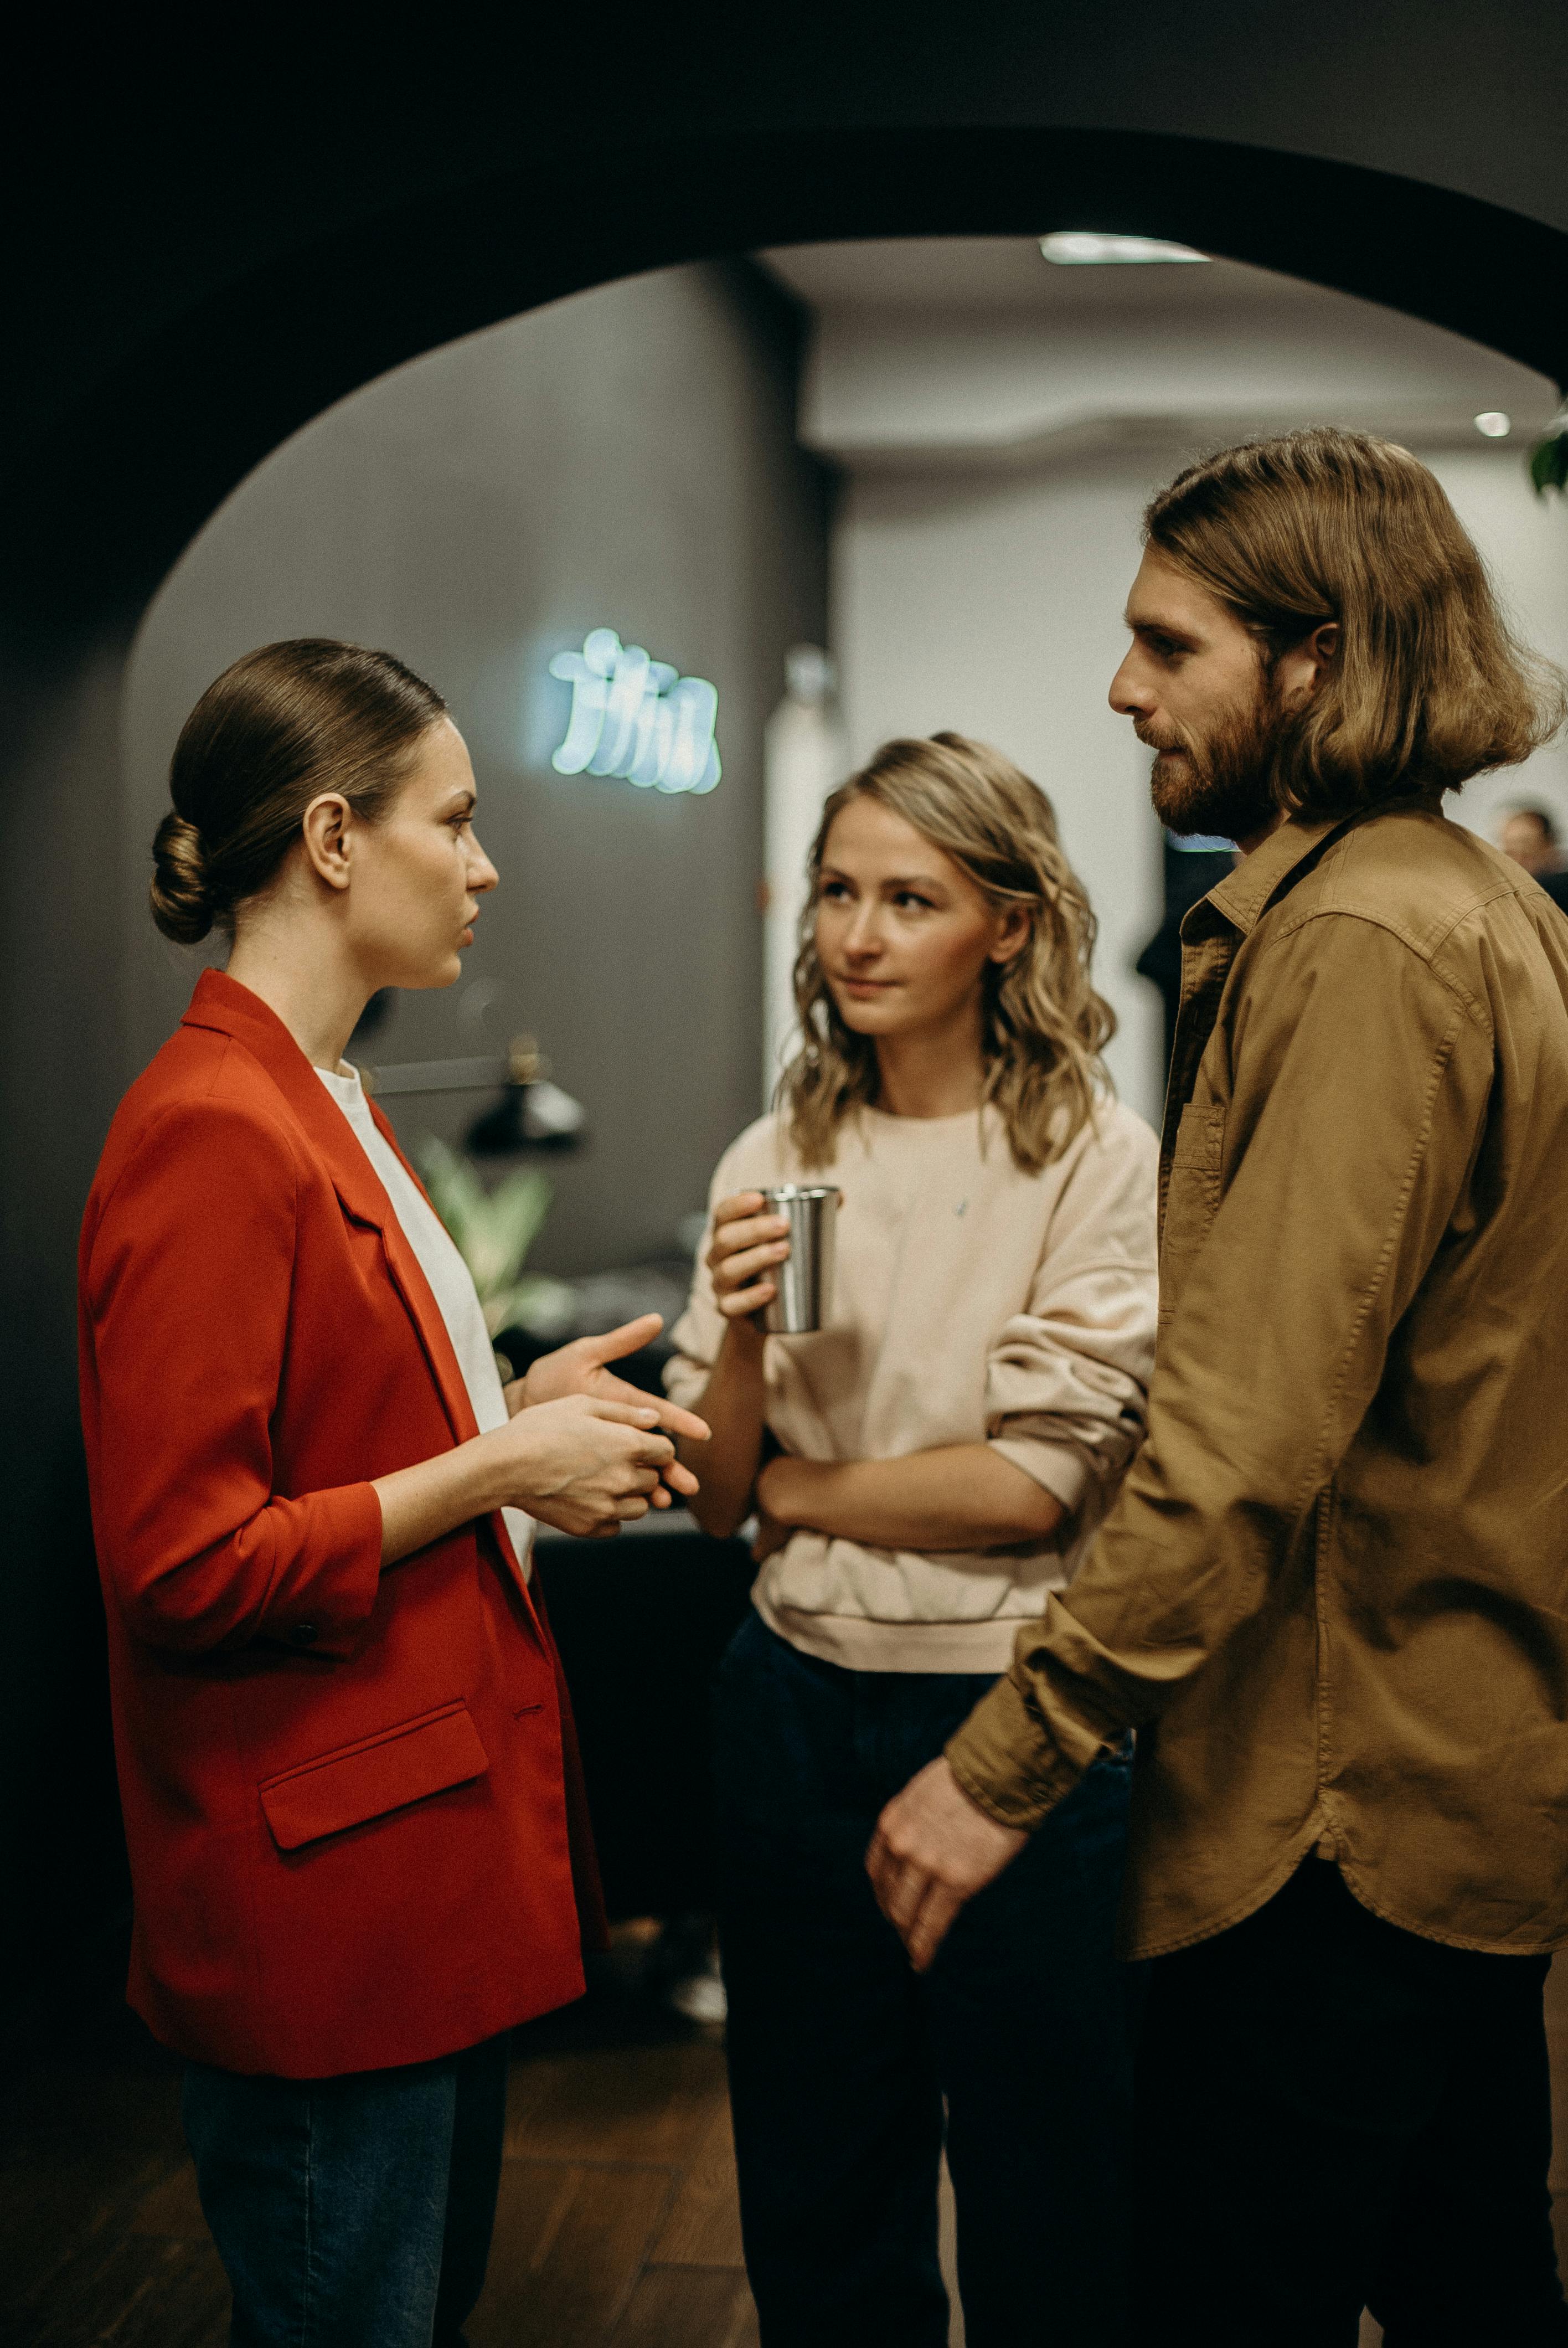 Two women and a man talking | Source: Pexels